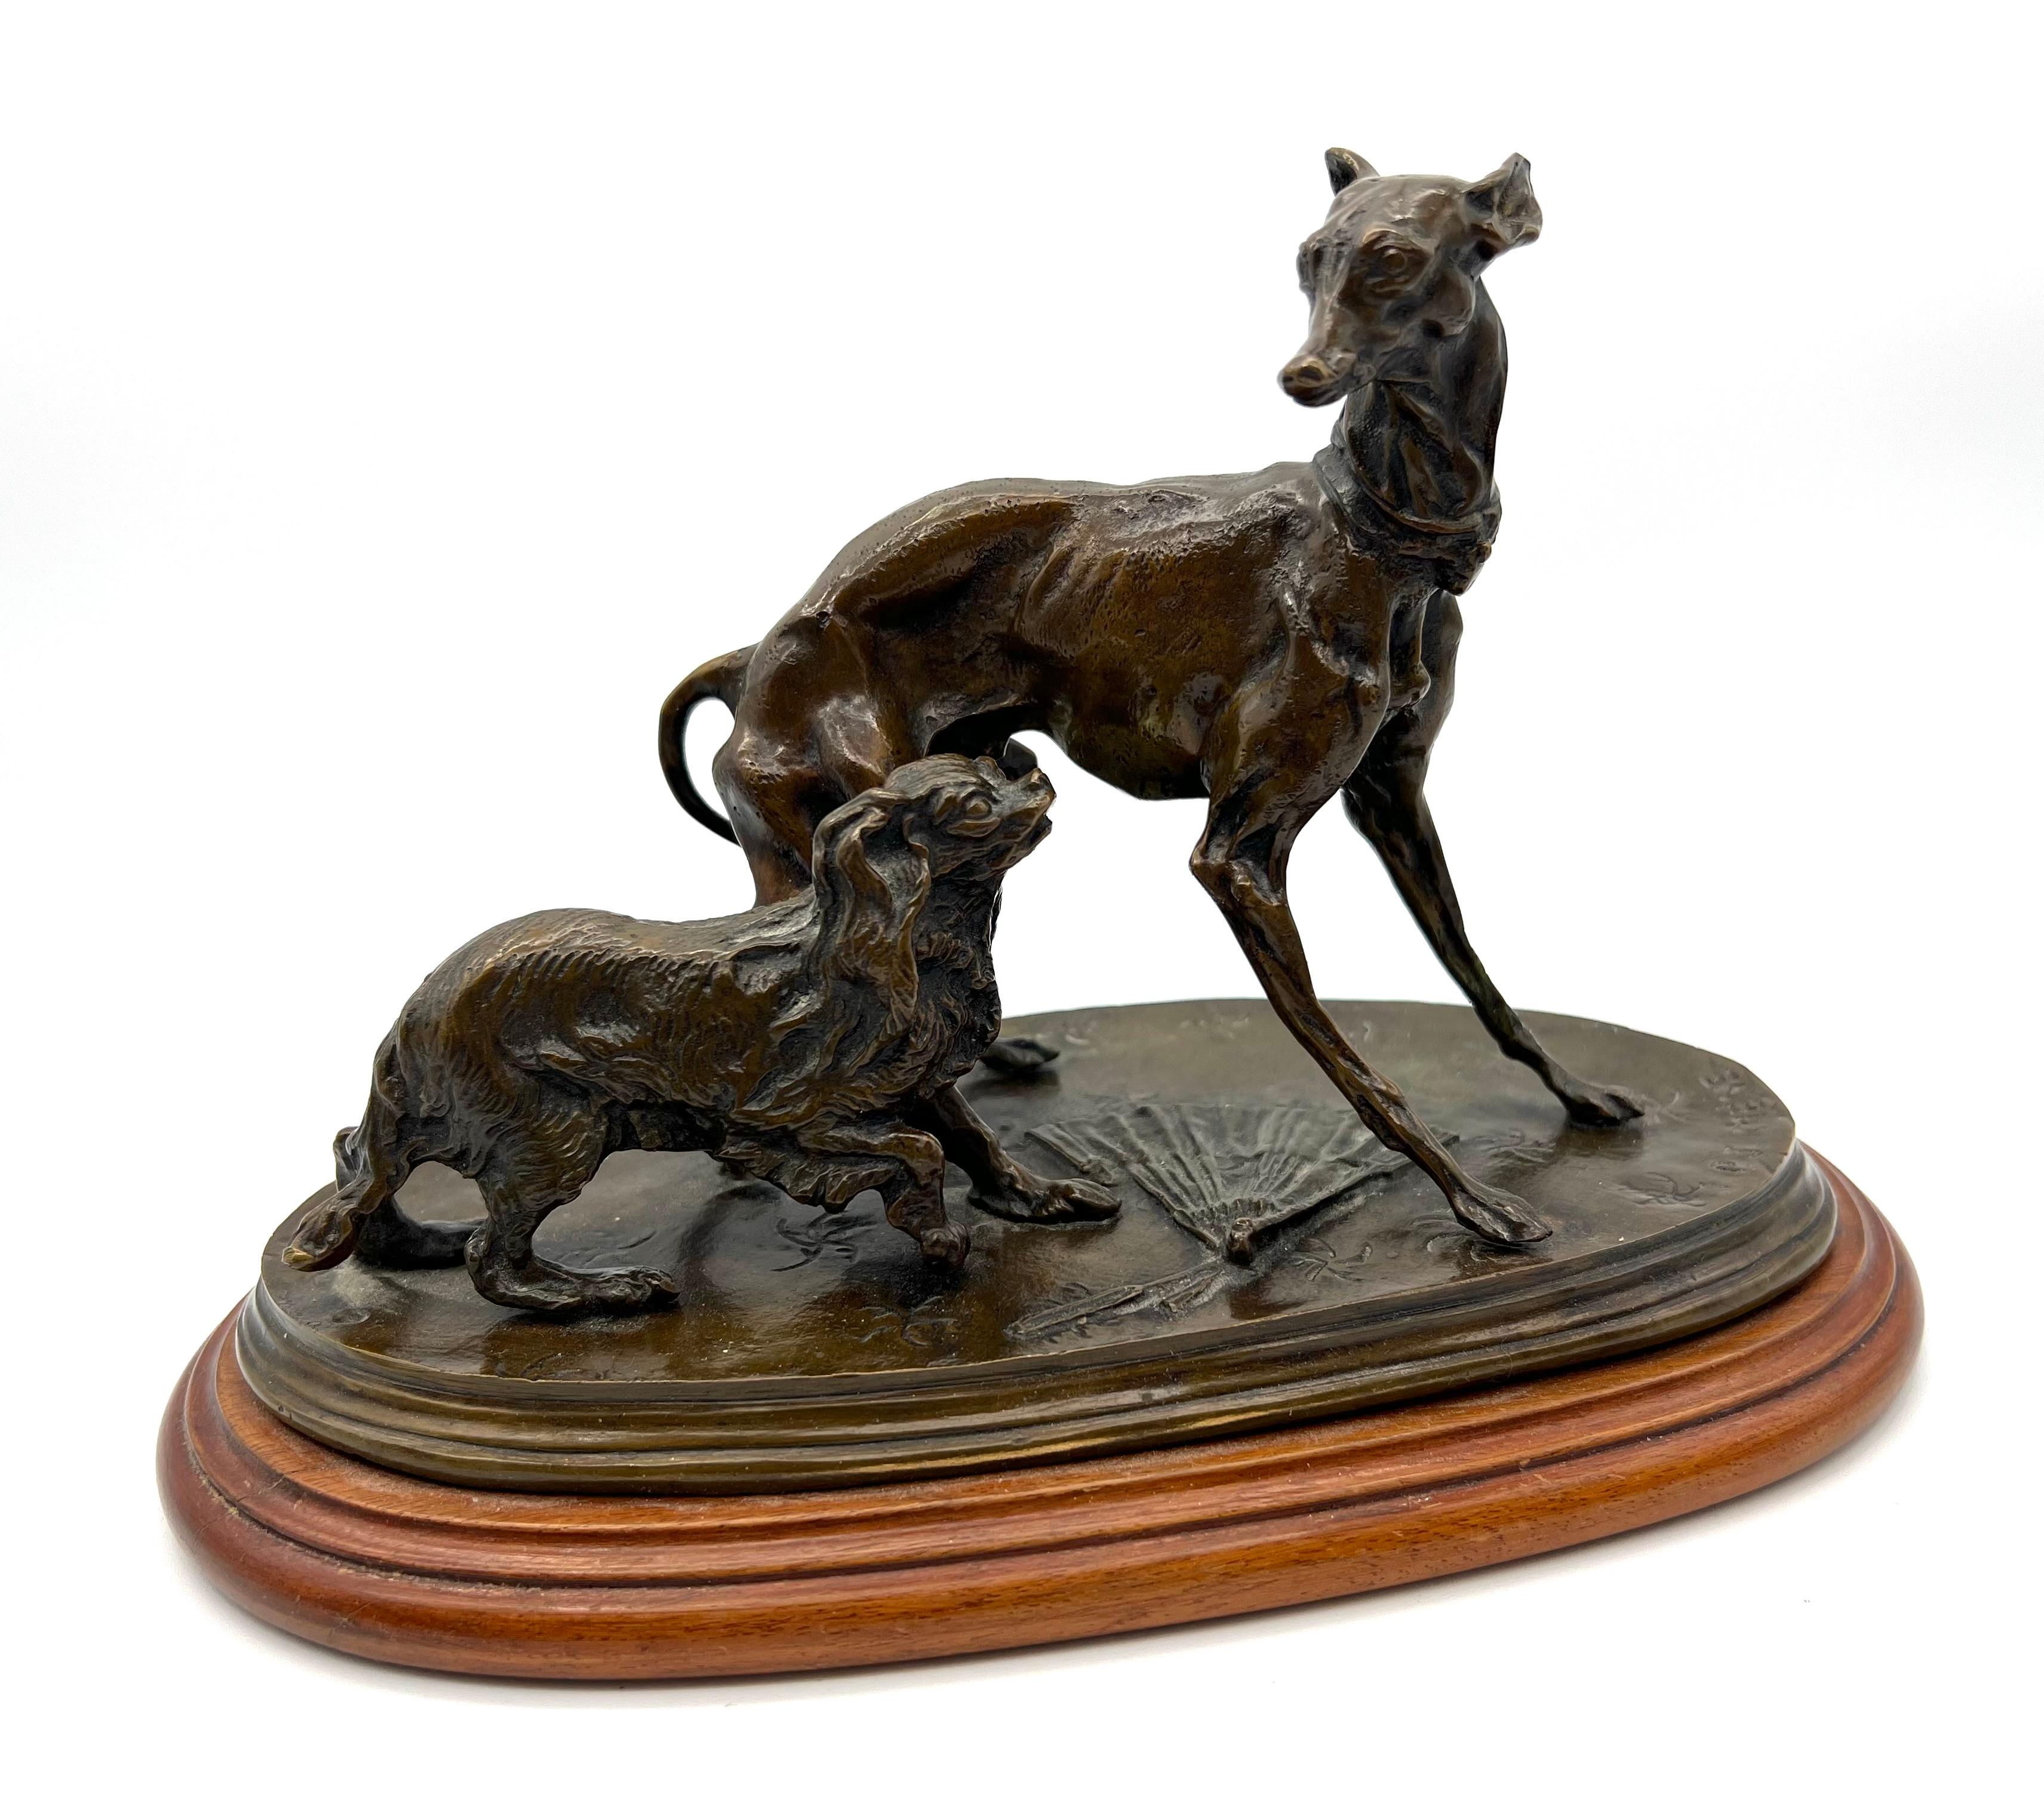 Superb bronze animal group with brown patina representing two dogs, a greyhound and a King - Charles , by Pierre - Jules Mêne .
Signature of the sculptor 